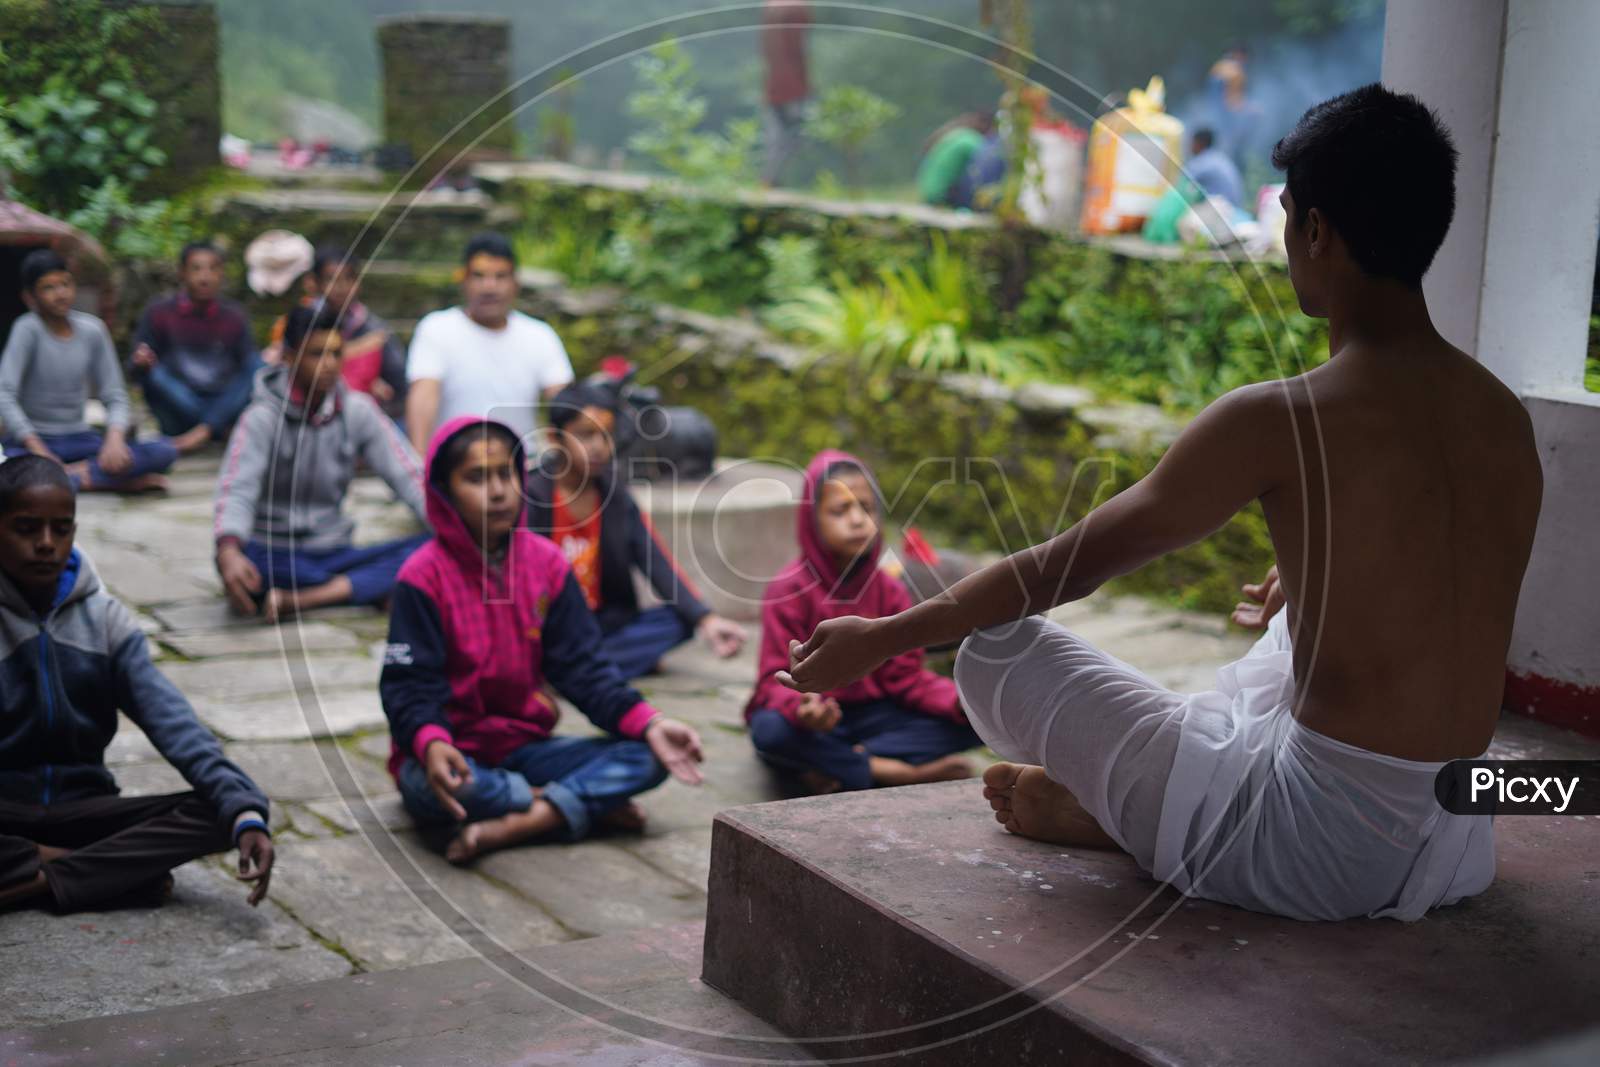 Almora, India - September 02, 2020: Young Man Wearing A White Dhoti Taking Yoga Classes Of Young Kids And Older Men